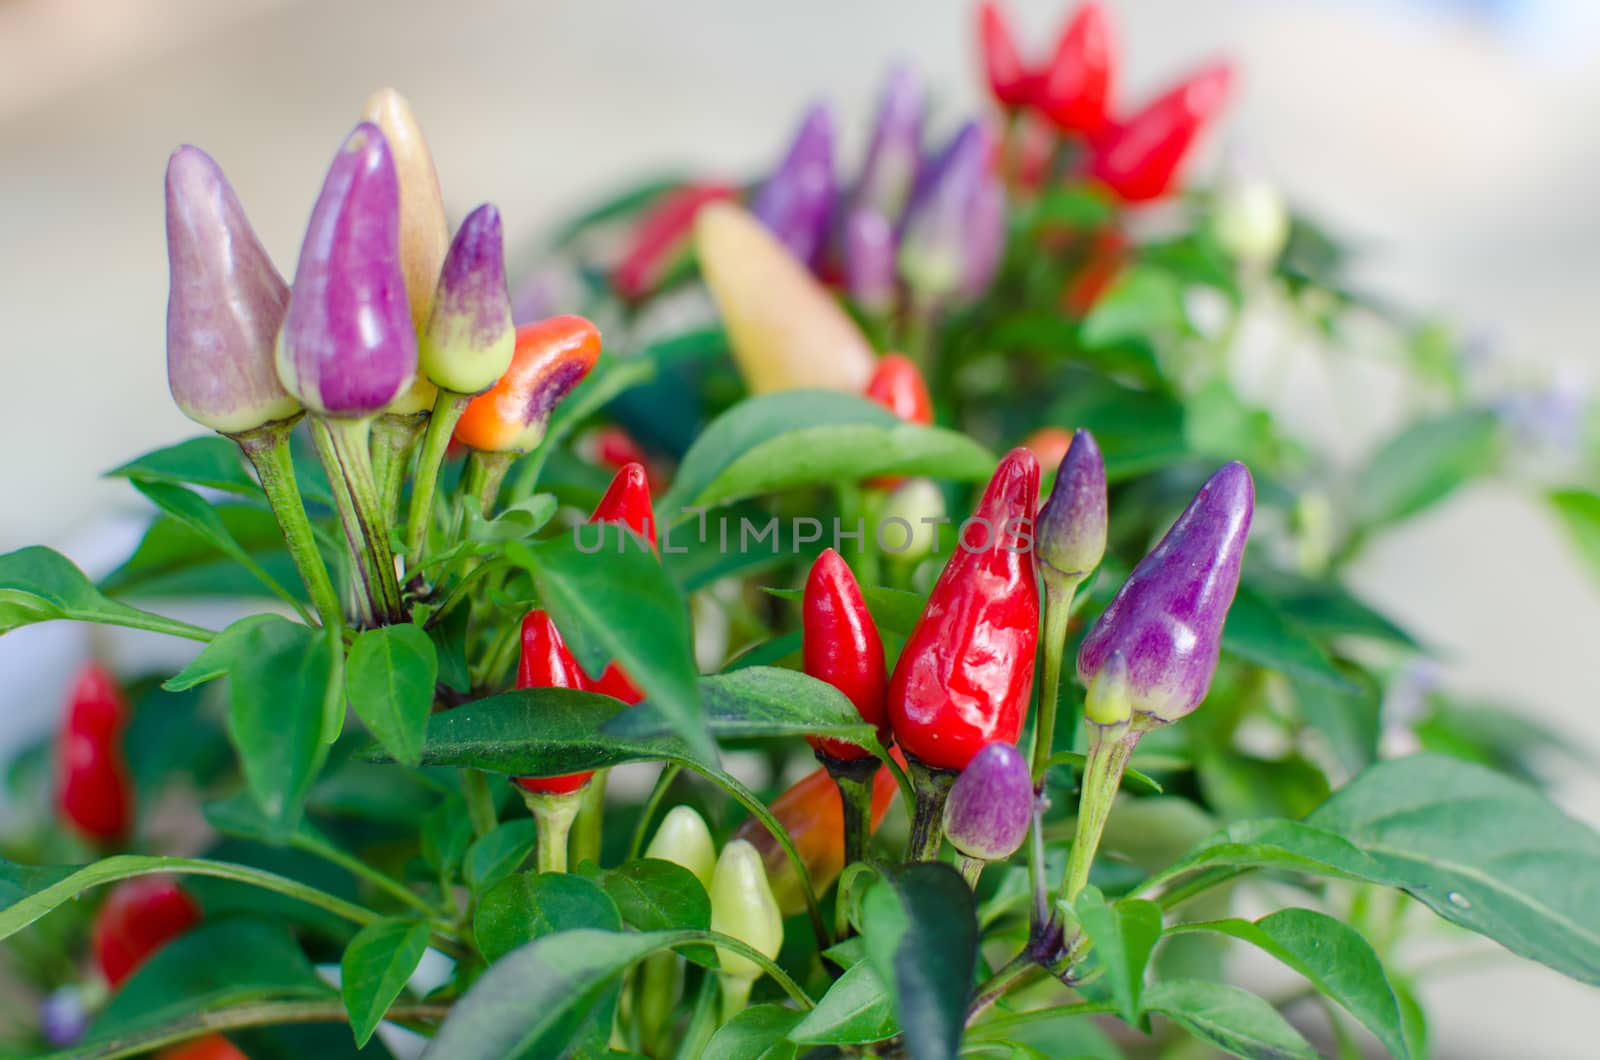 Chili with small purple and red for ornamental gardens. , Have another name called Bolivian Rainbow Chili.